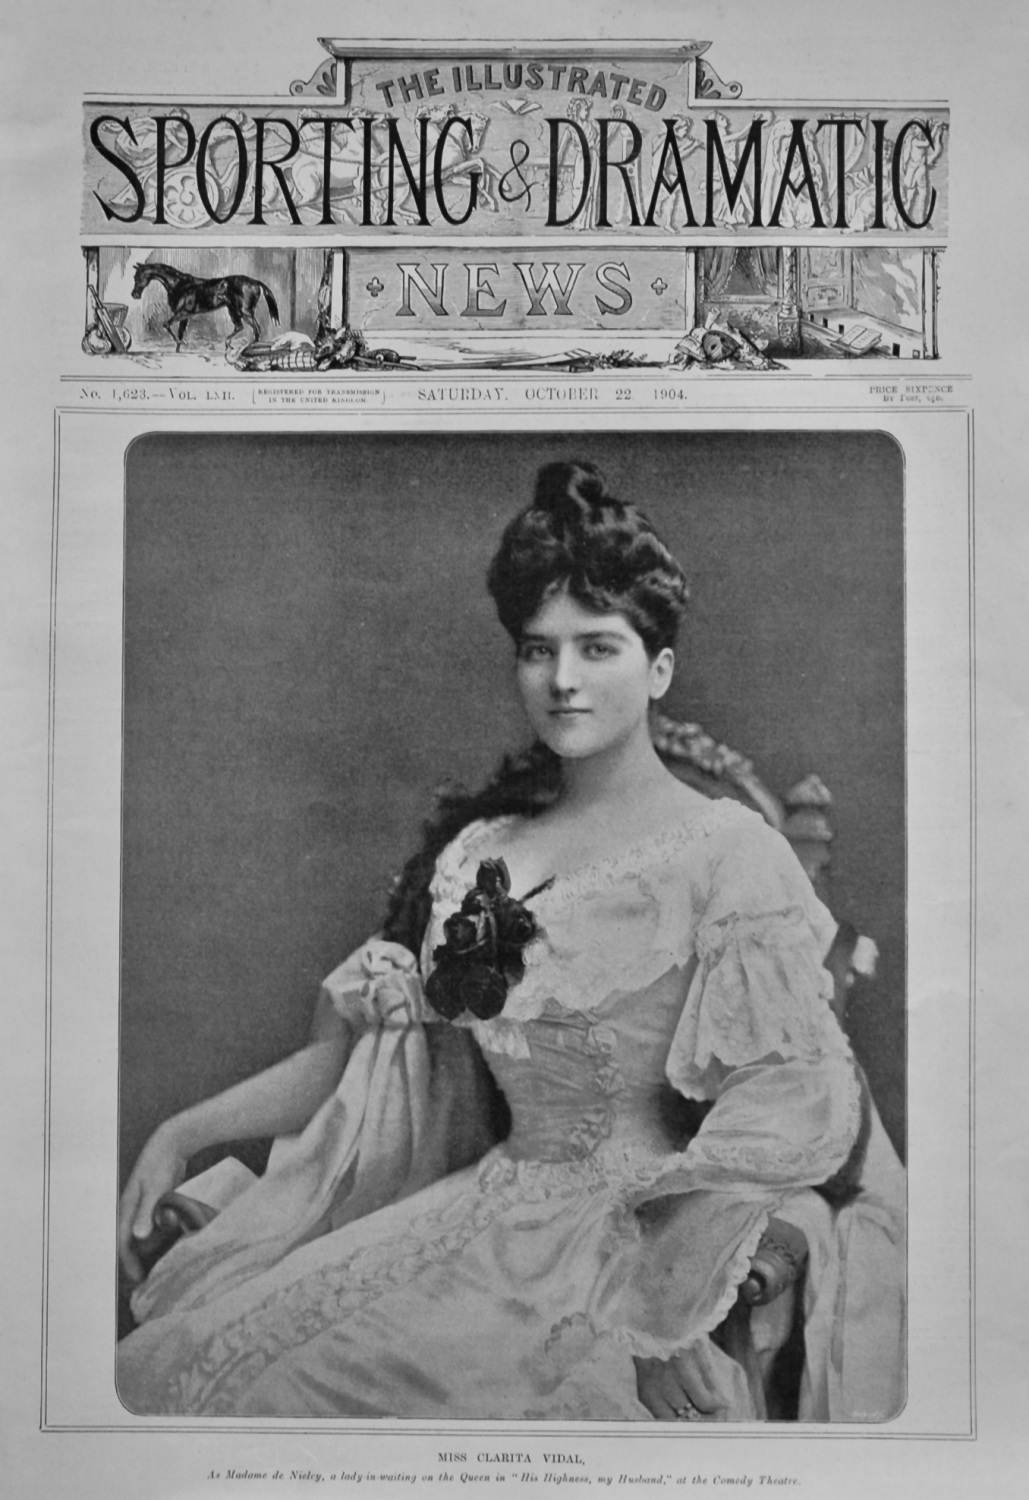 Illustrated Sporting and Dramatic News,  October 22nd, 1904.